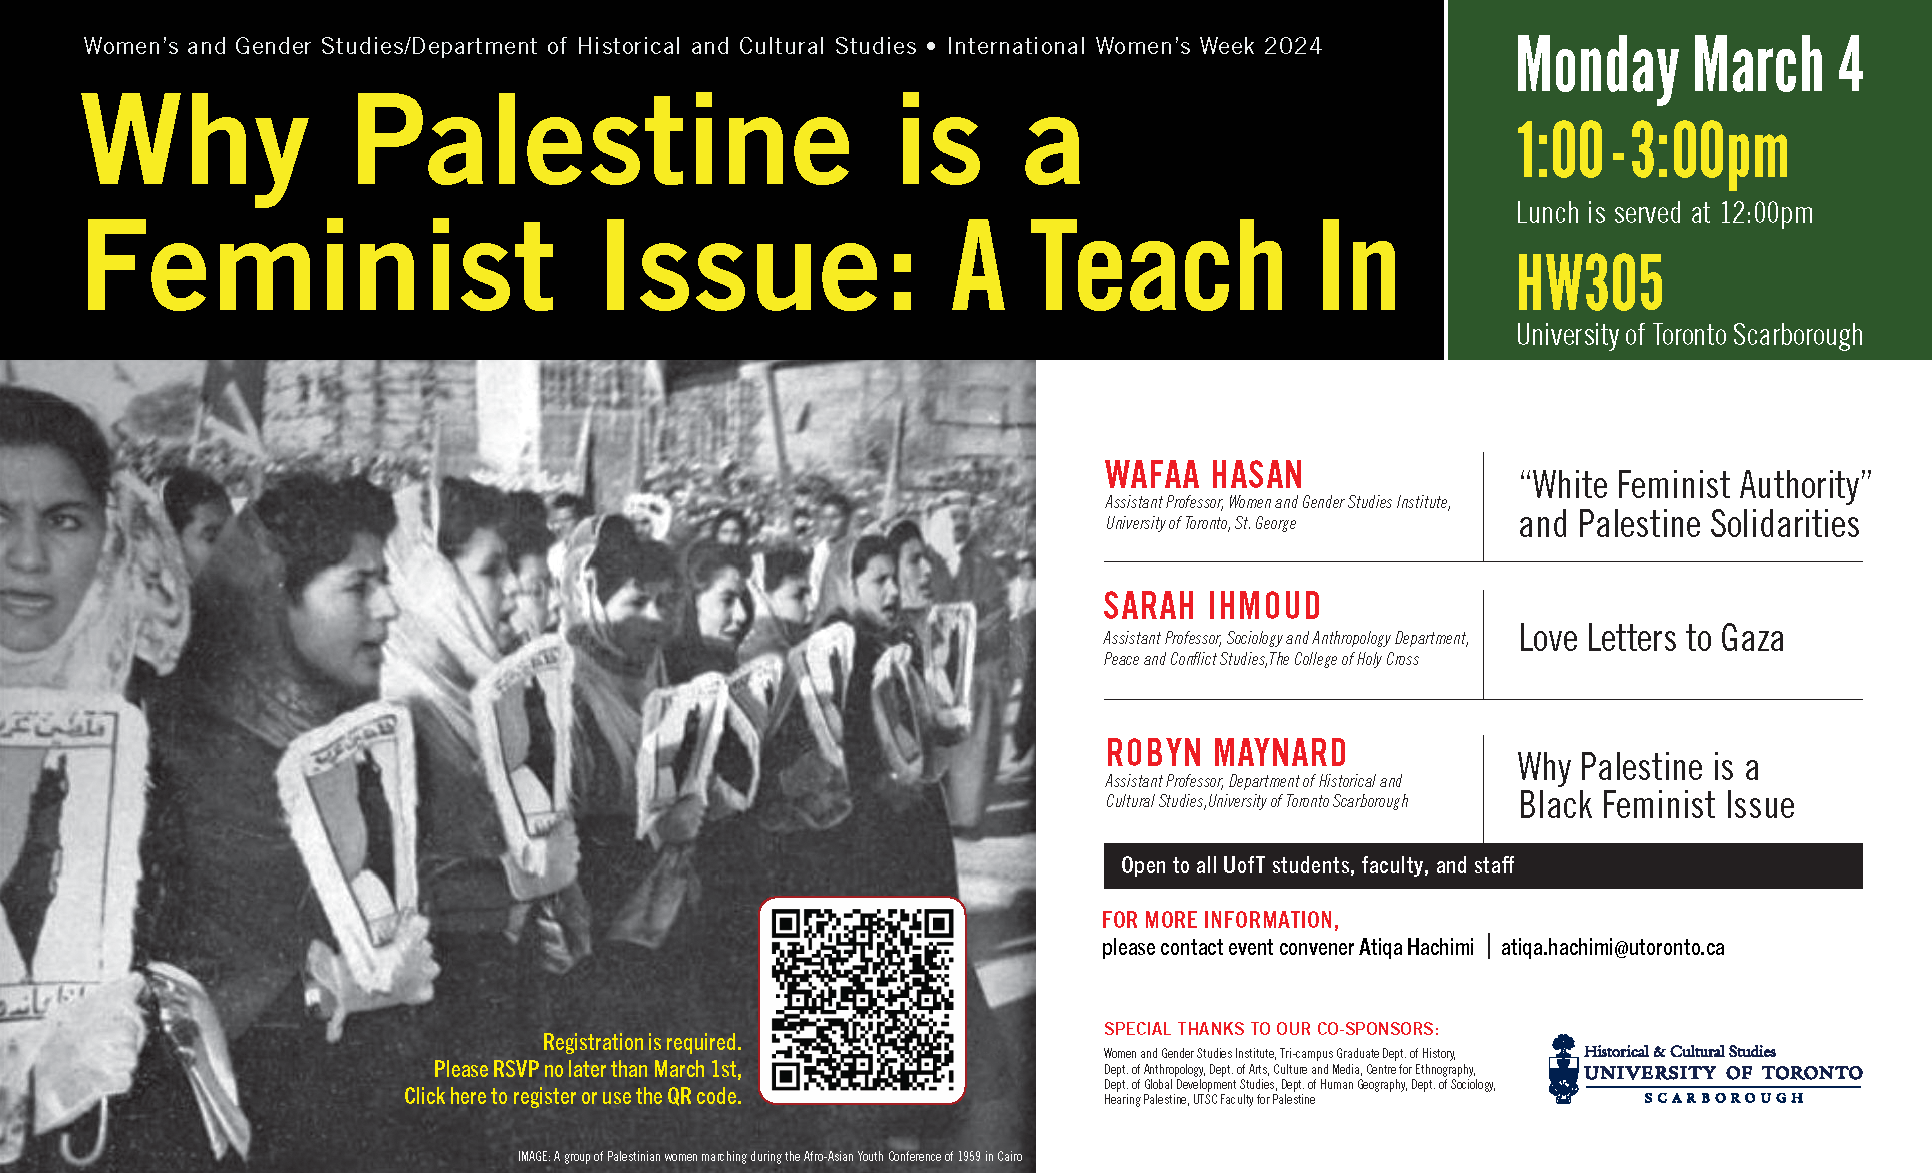 Poster for Why Palestine is a Feminist Issue Teach In event which includes the speaker and talk titles, date, time and location